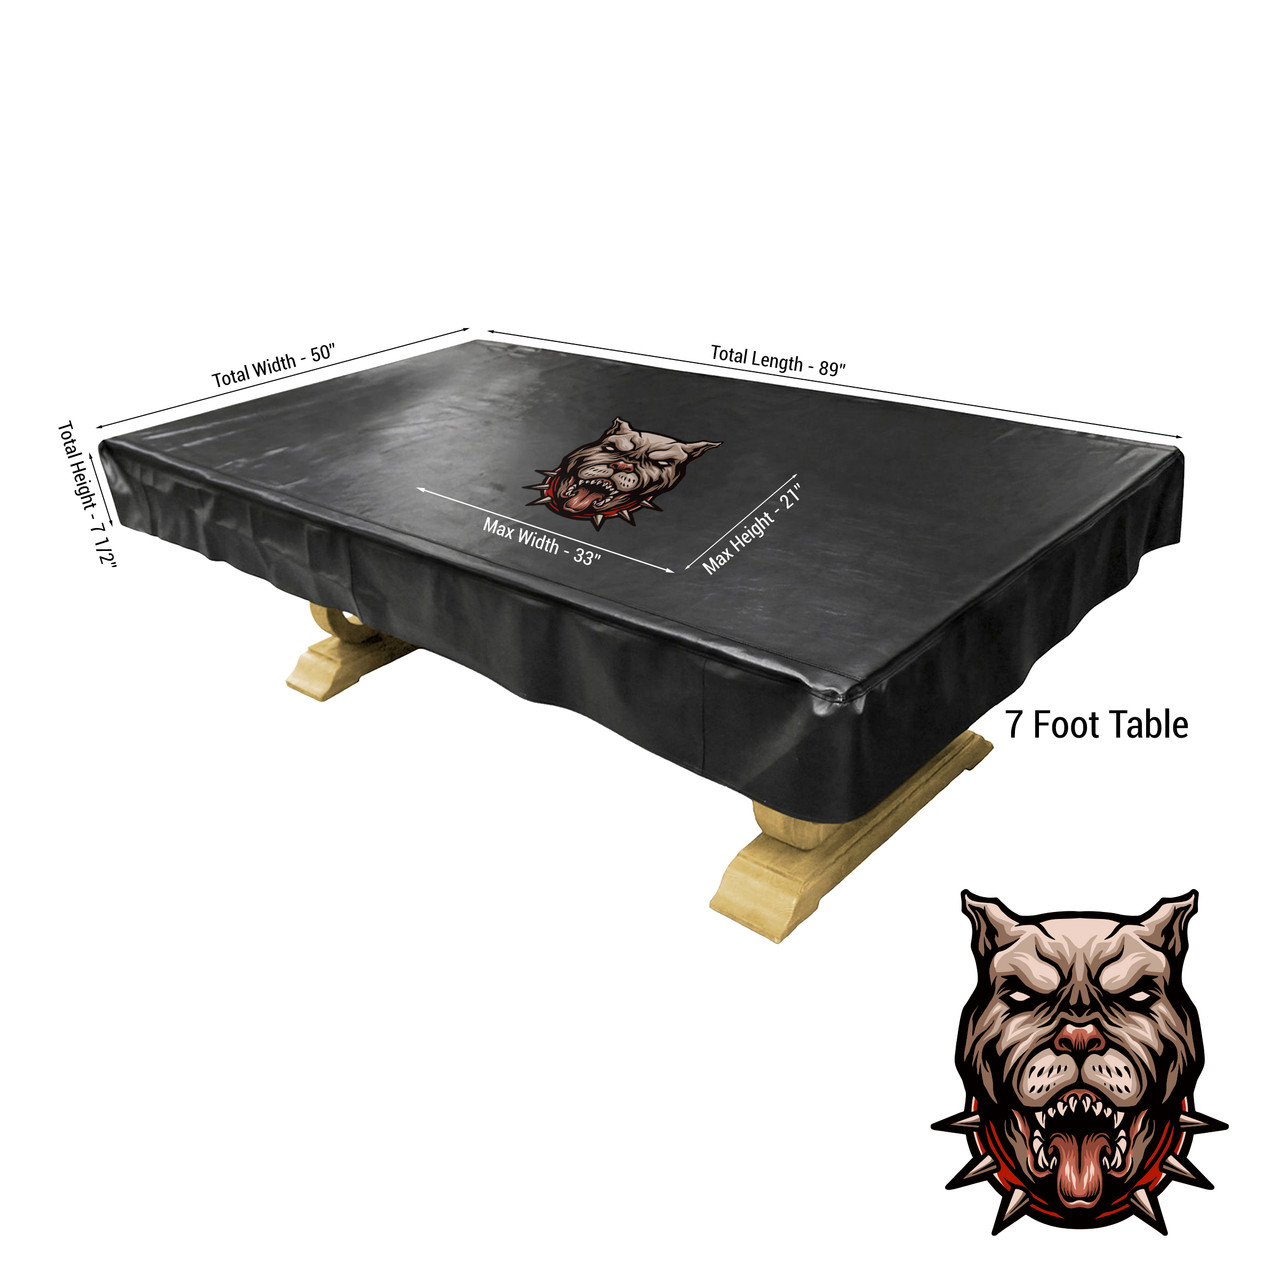 Custom Image or Logo Pool Table Cover for 7' Pool Table - Measurements